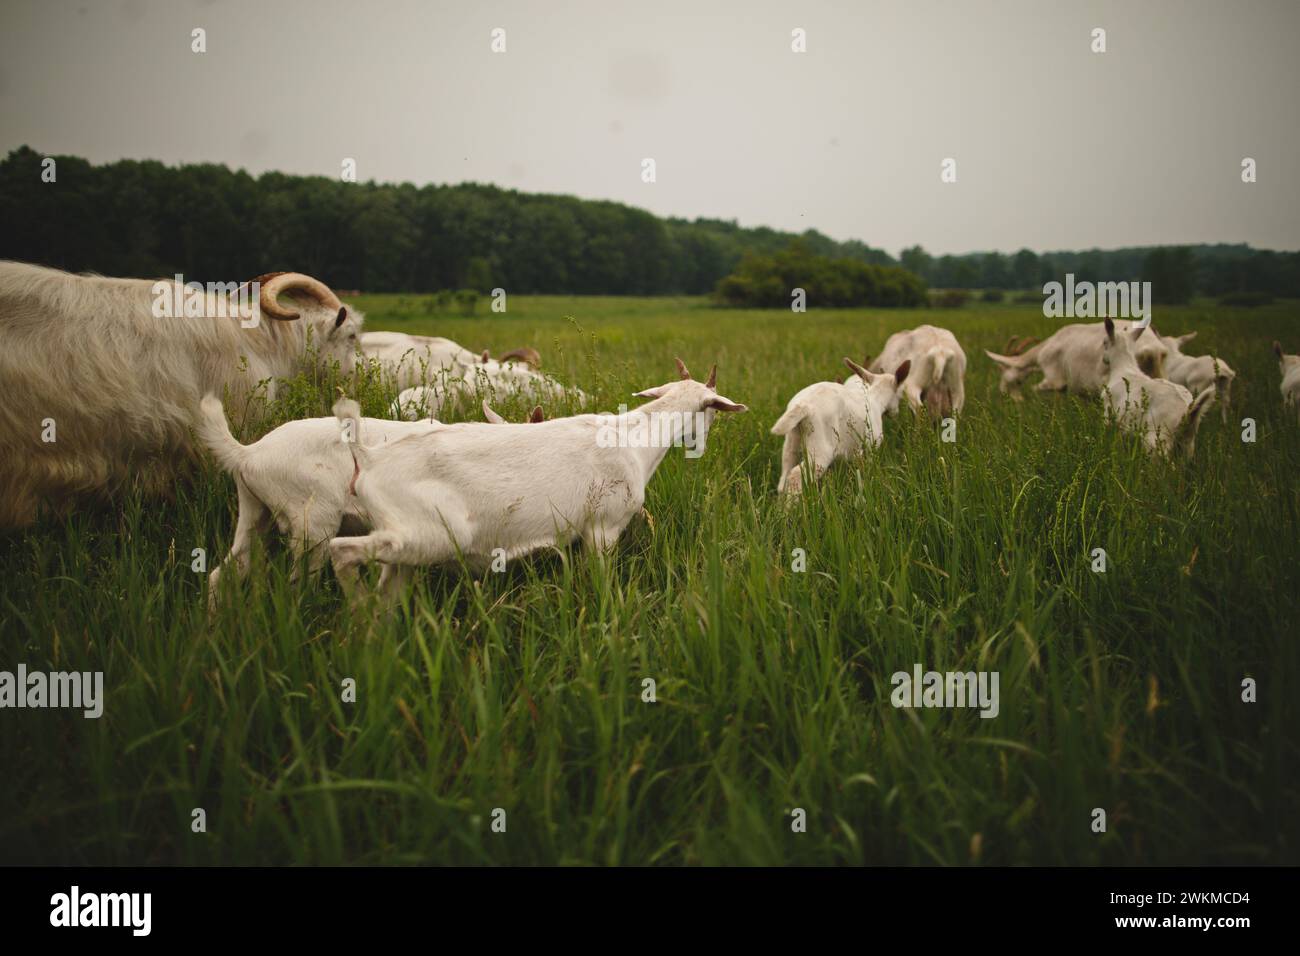 Goats grazing in lush pasture with trees in background Stock Photo